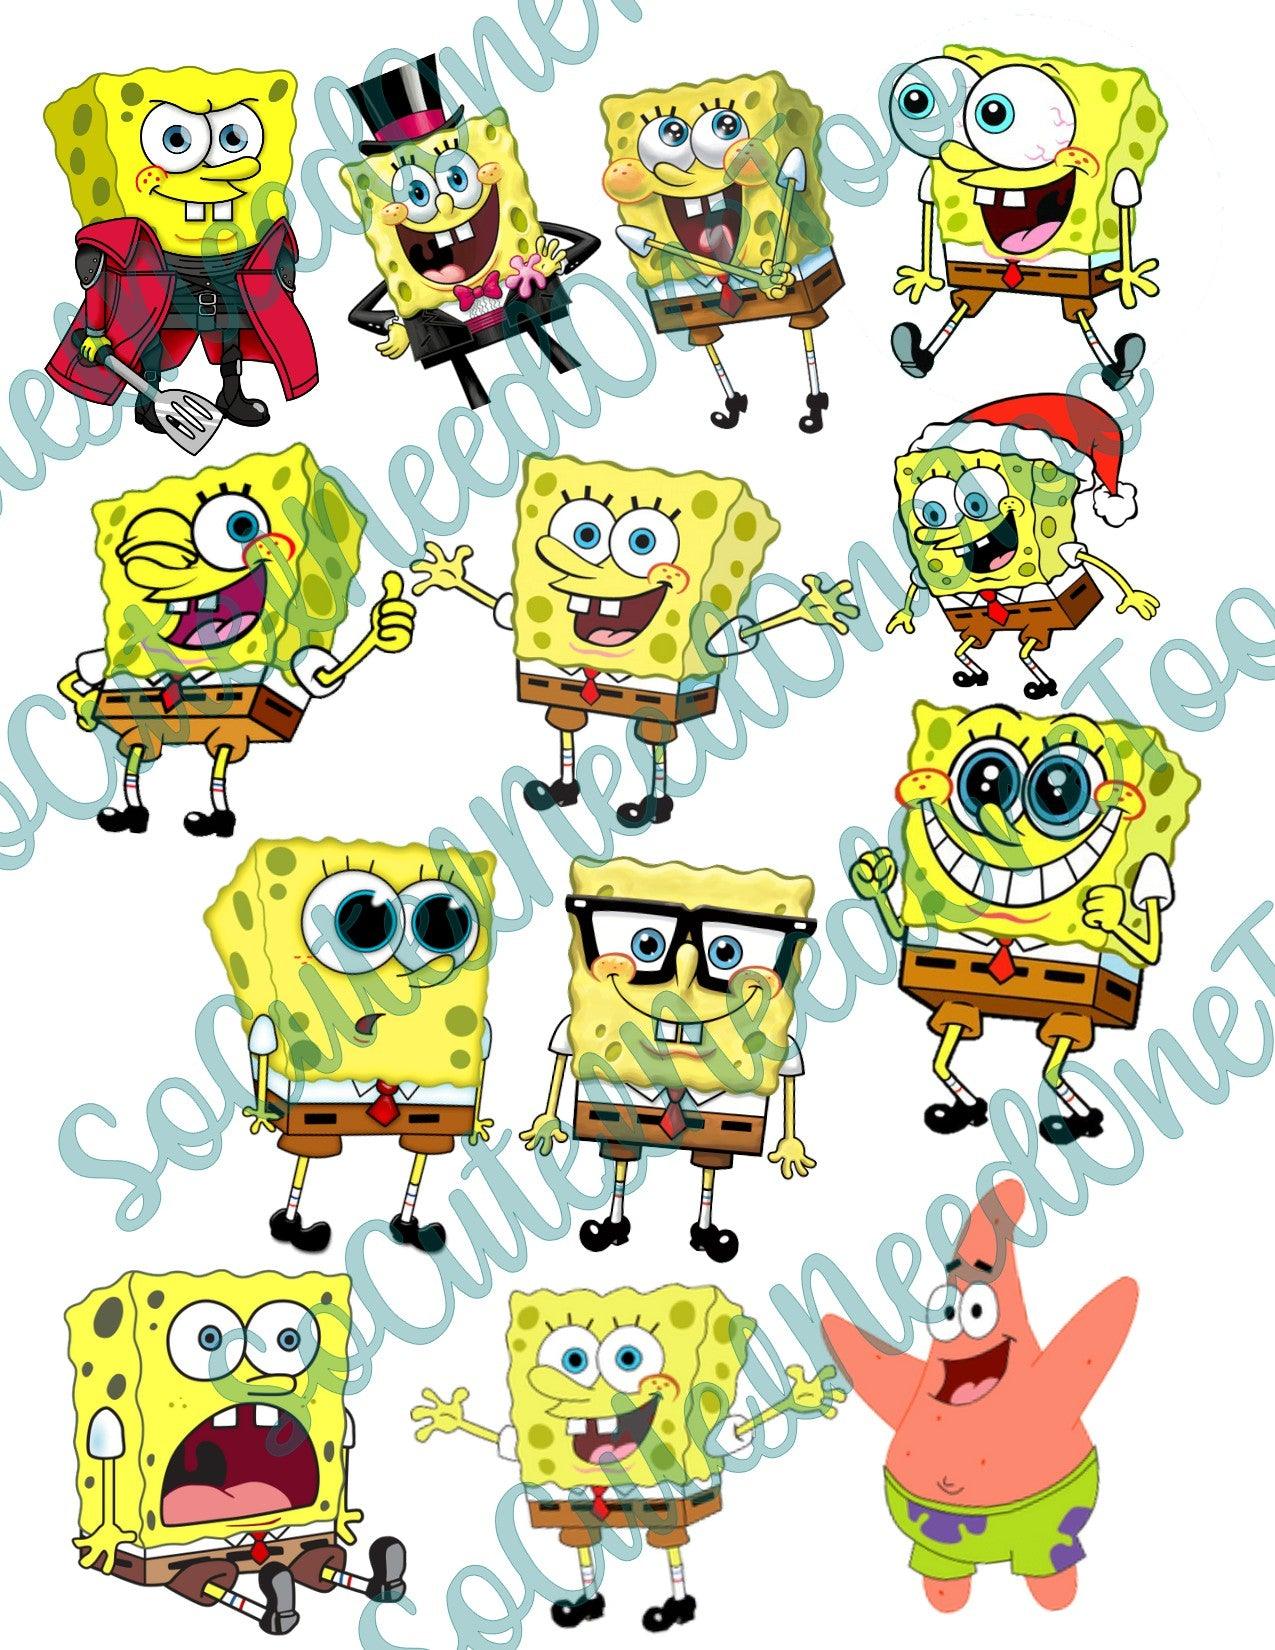 Sponge Bob Square Pants On Clear Water Slide Paper Sealed and Ready To Use - SoCuteINeedOneToo